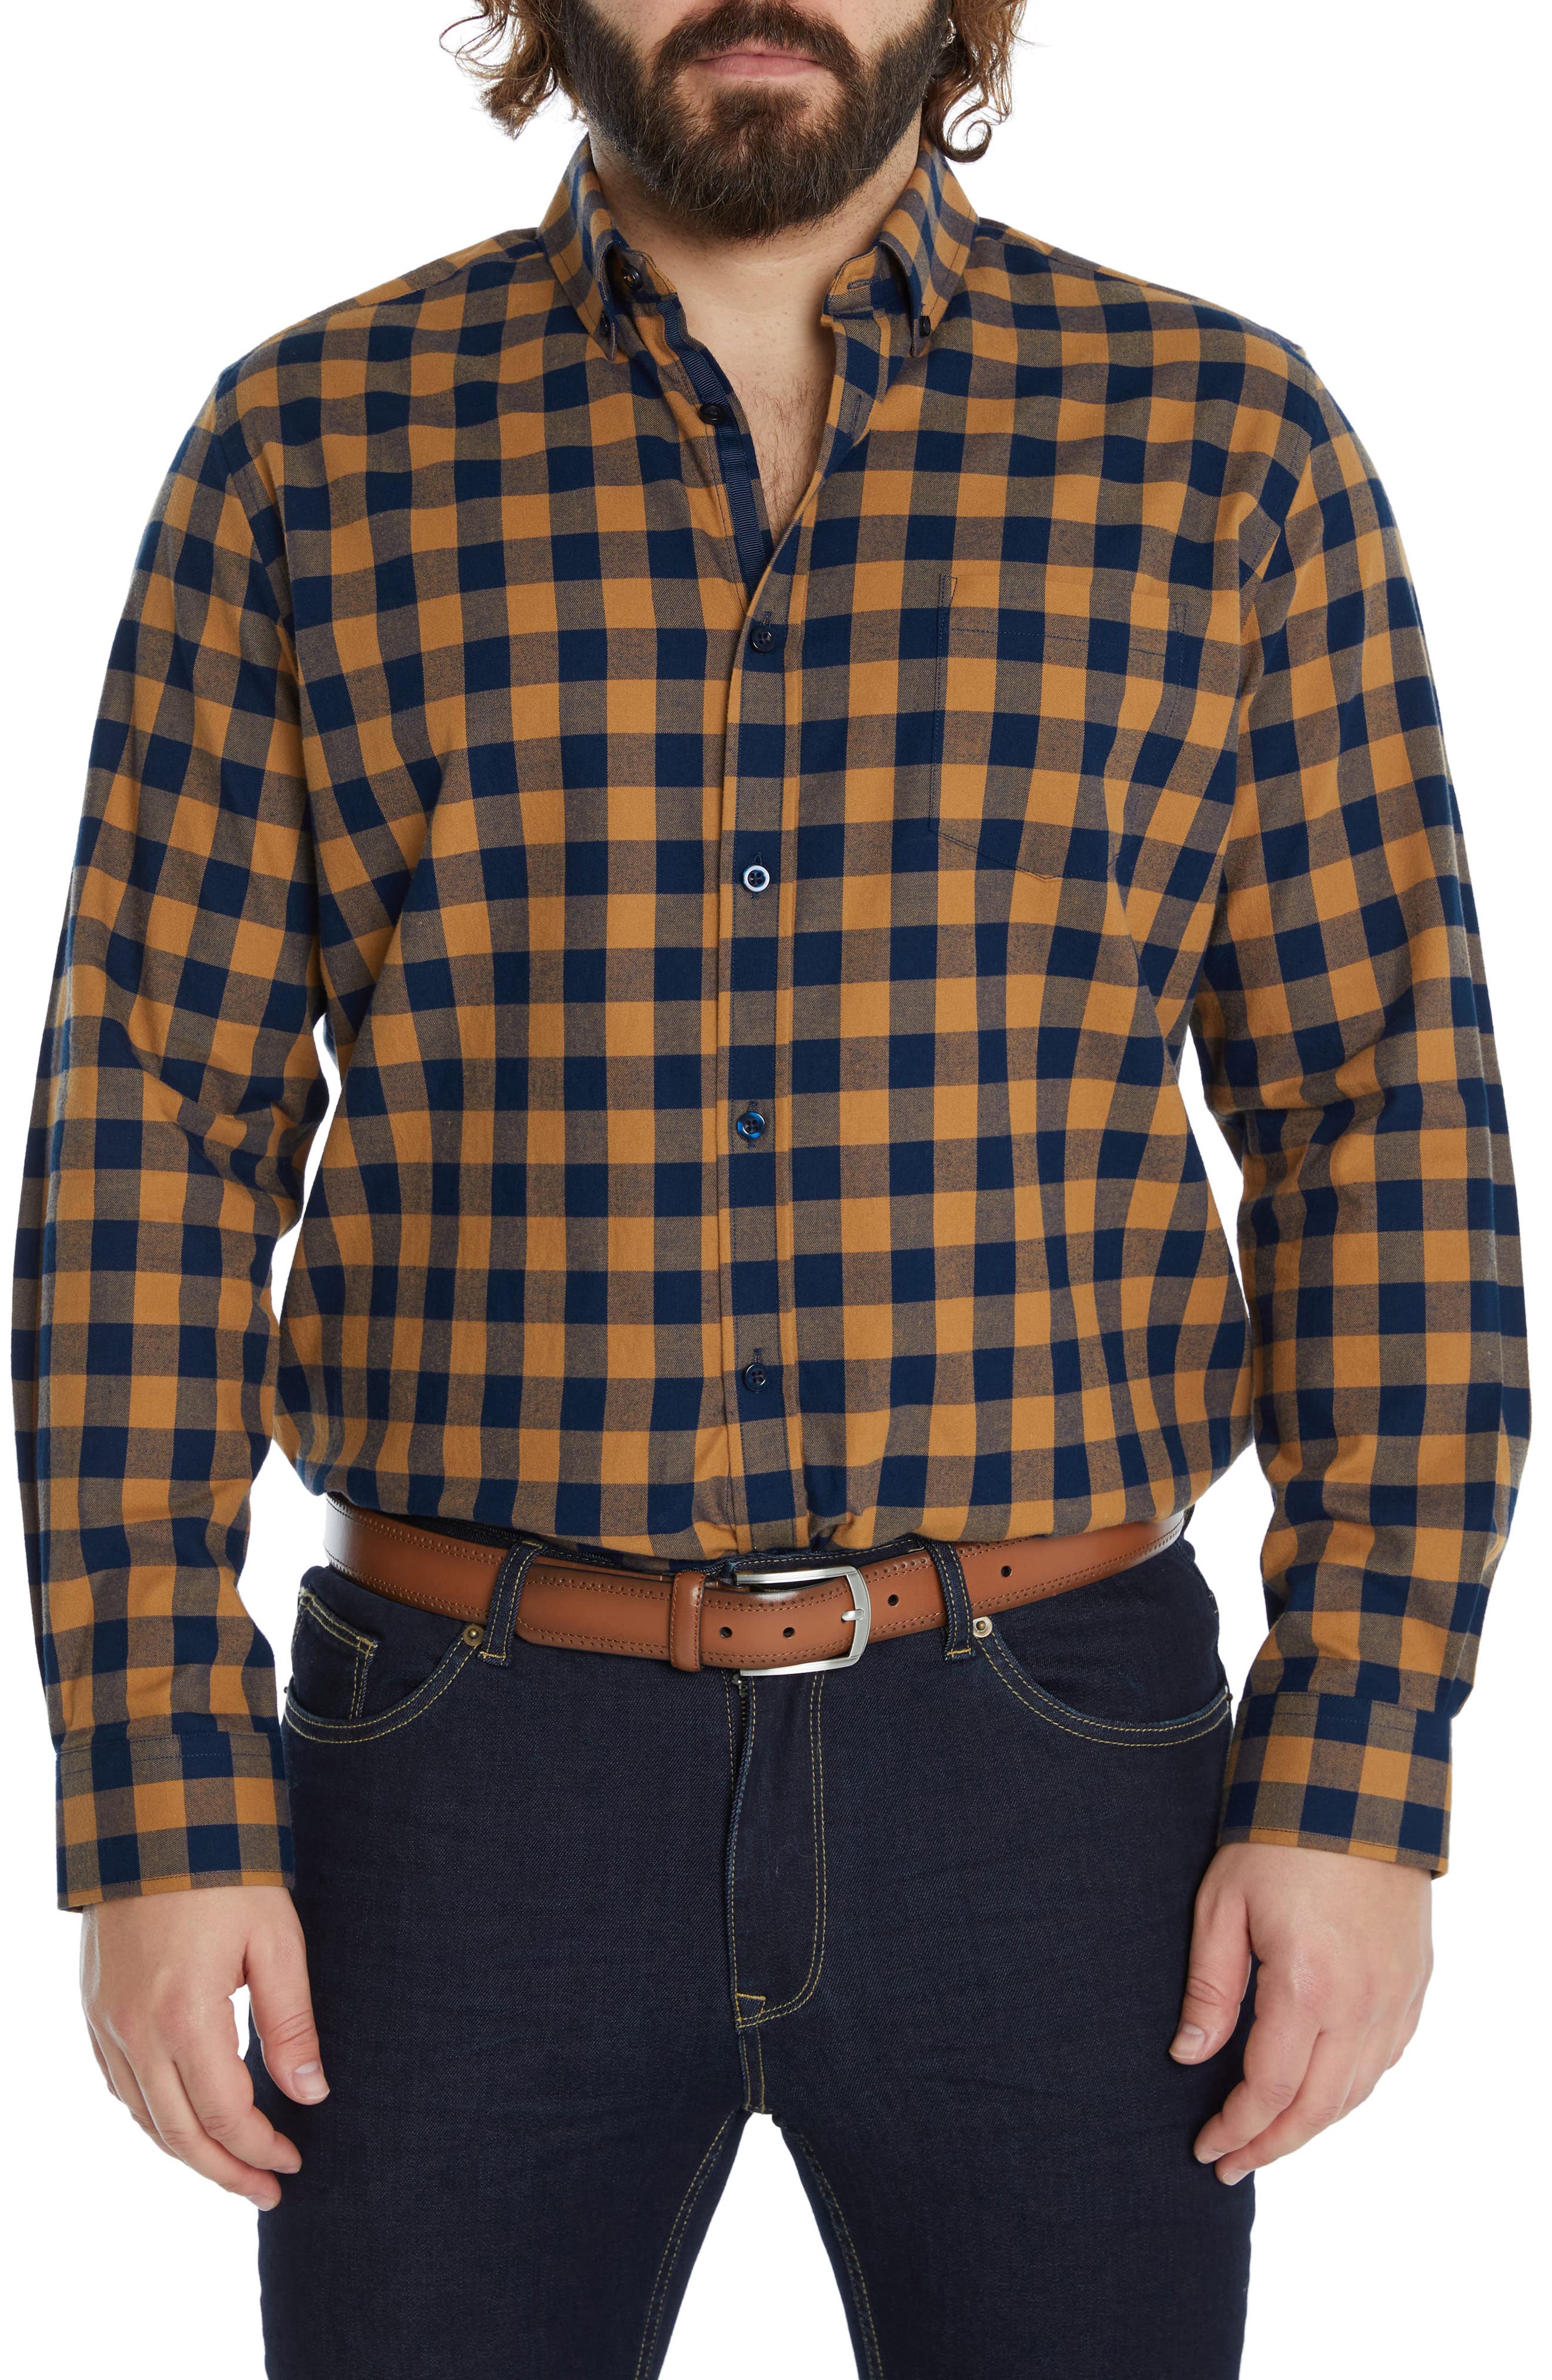 Johnny Bigg Jace Check Cotton Button-Down Shirt in Mustard